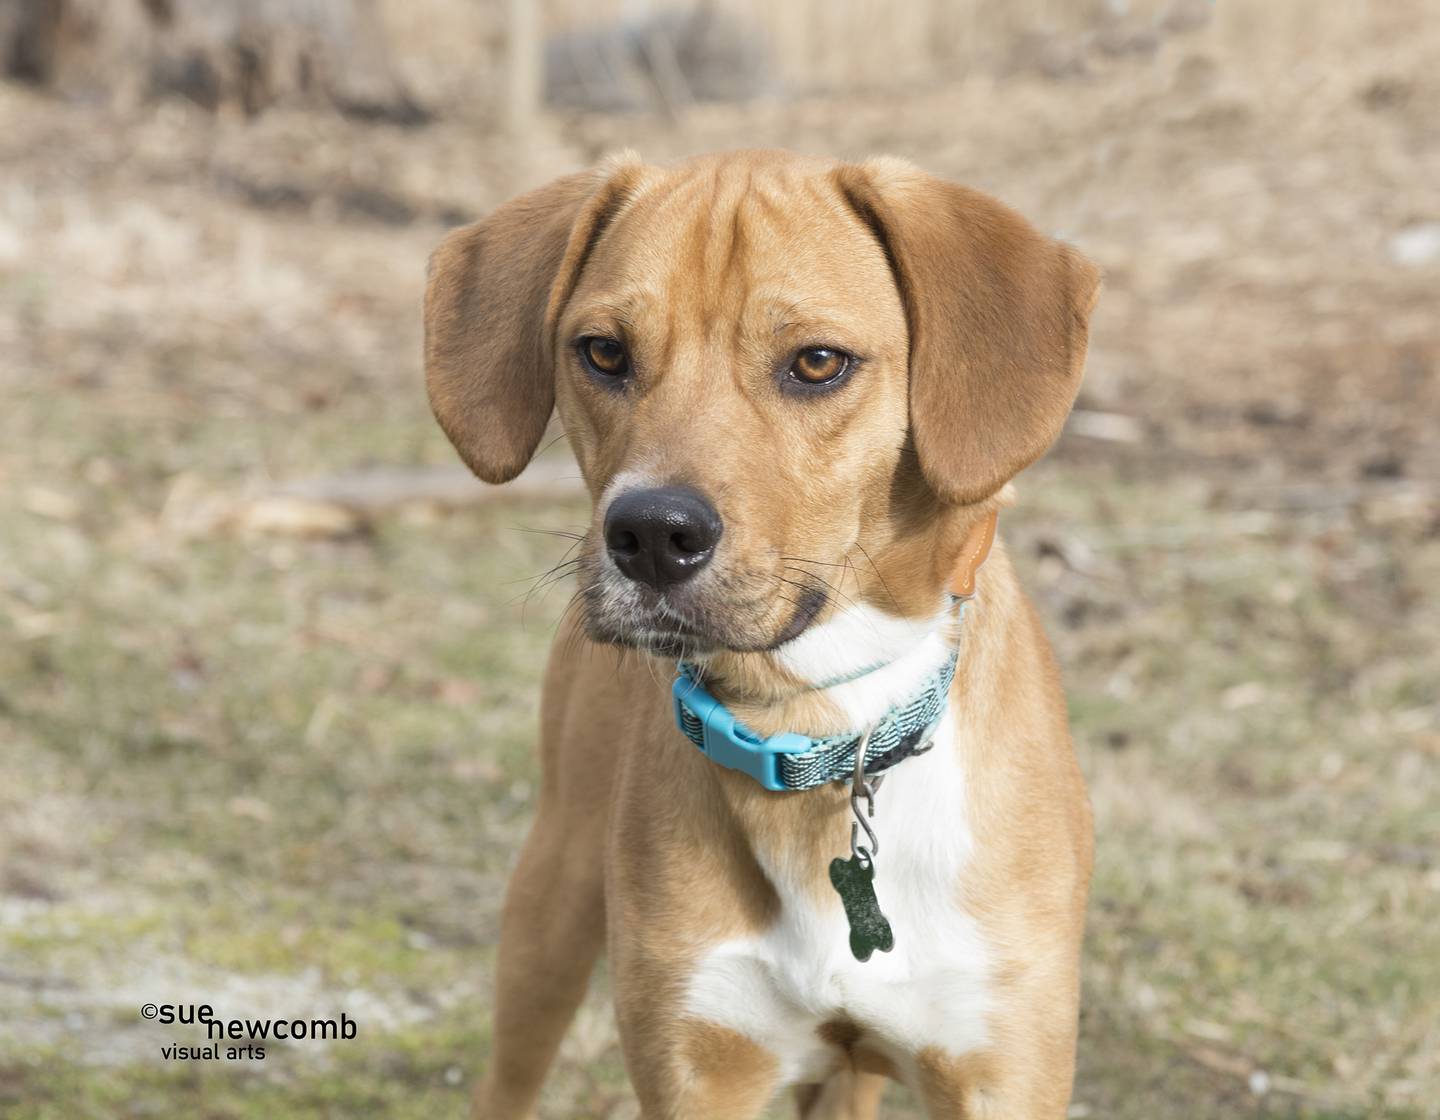 Bugsy is Labrador retriever/hound mix. He is shy at first but then he is all wiggles and jumps. He is super playful and loves other small dogs. Contact the Will County Humane Society at willcountyhumane.com and follow the instructions for the adoption process.